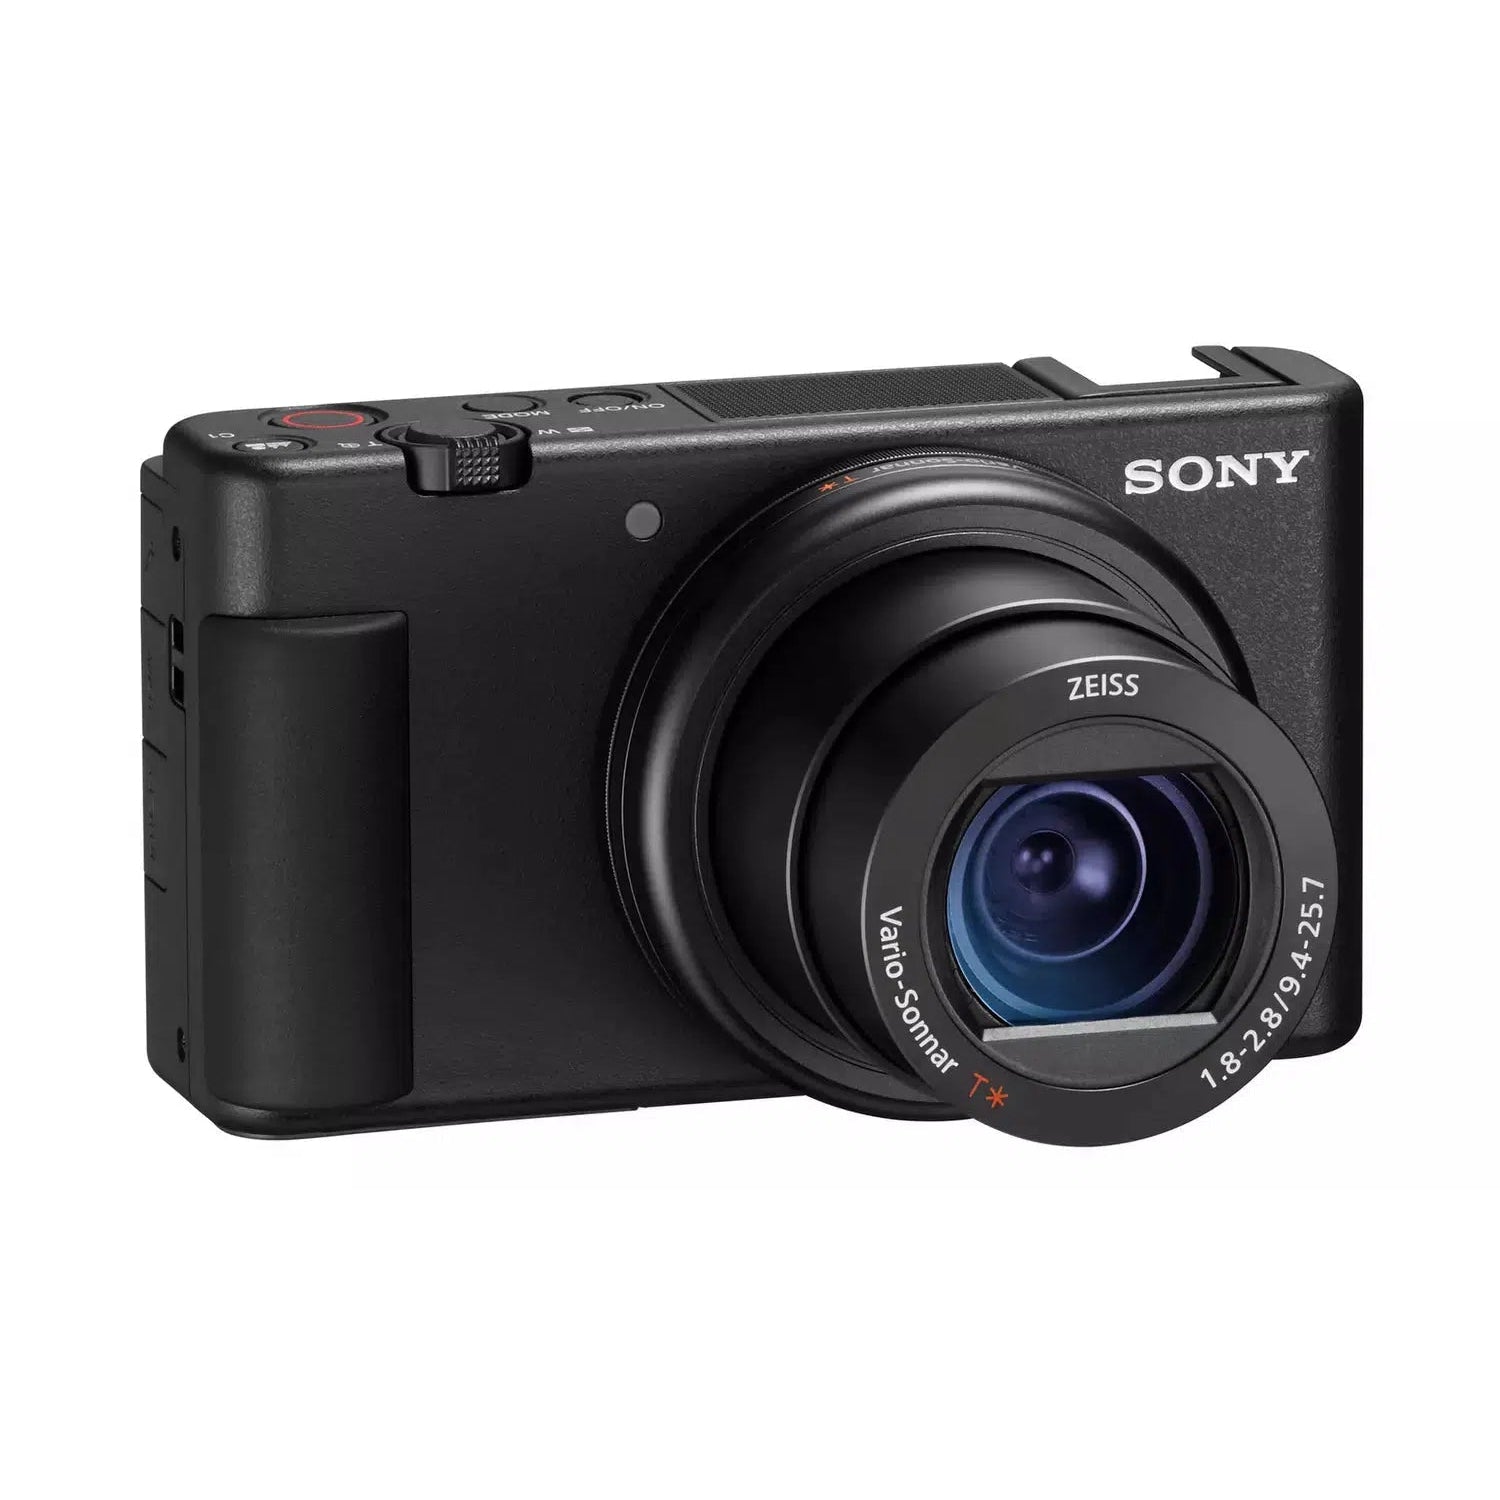 Sony ZV-1 Compact Vlogging Camera with 24-70mm Lens - Black - Good - With Charger